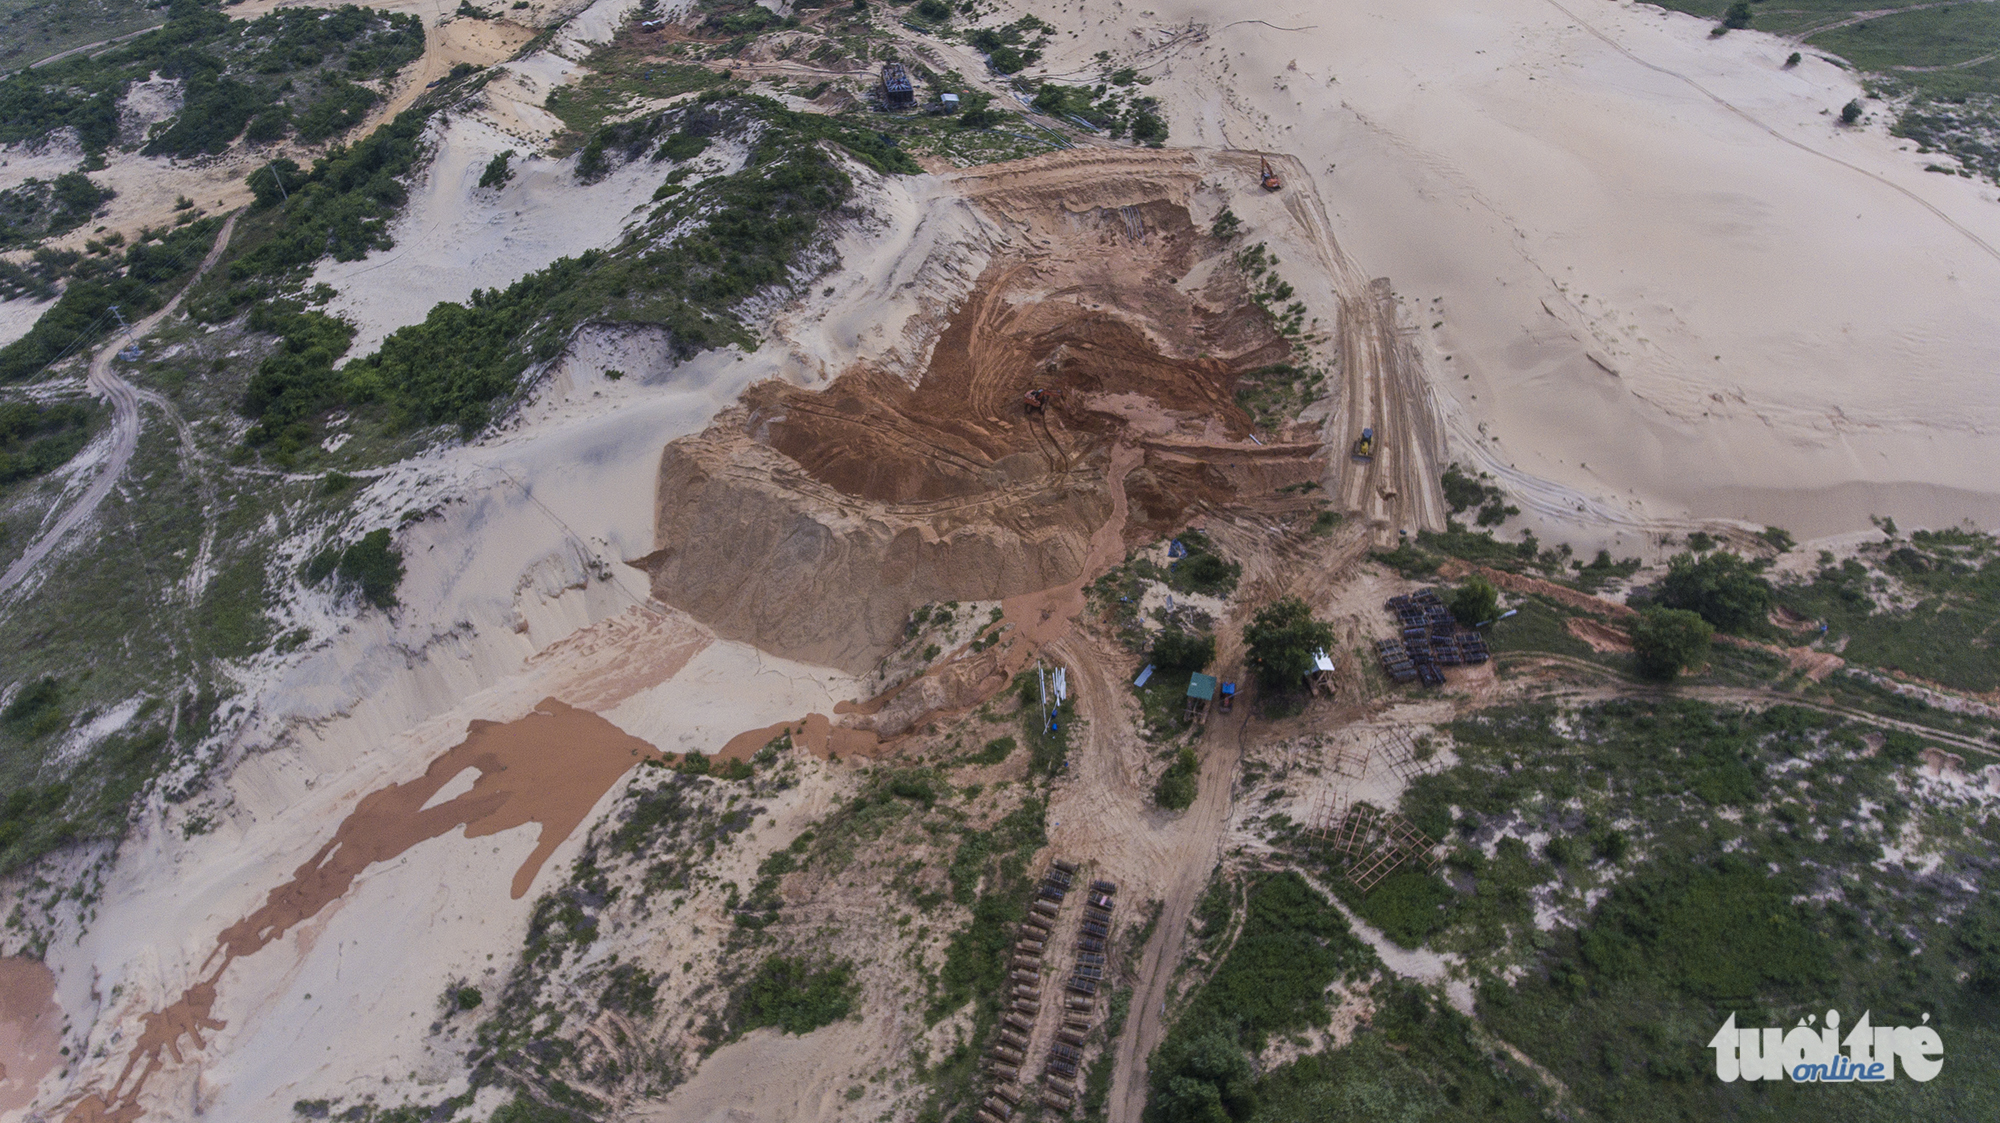 A titanium mine in Binh Thuan Province whose sludge reservoir gave way in 2016, causing an environmental disaster. Photo: Tuoi Tre